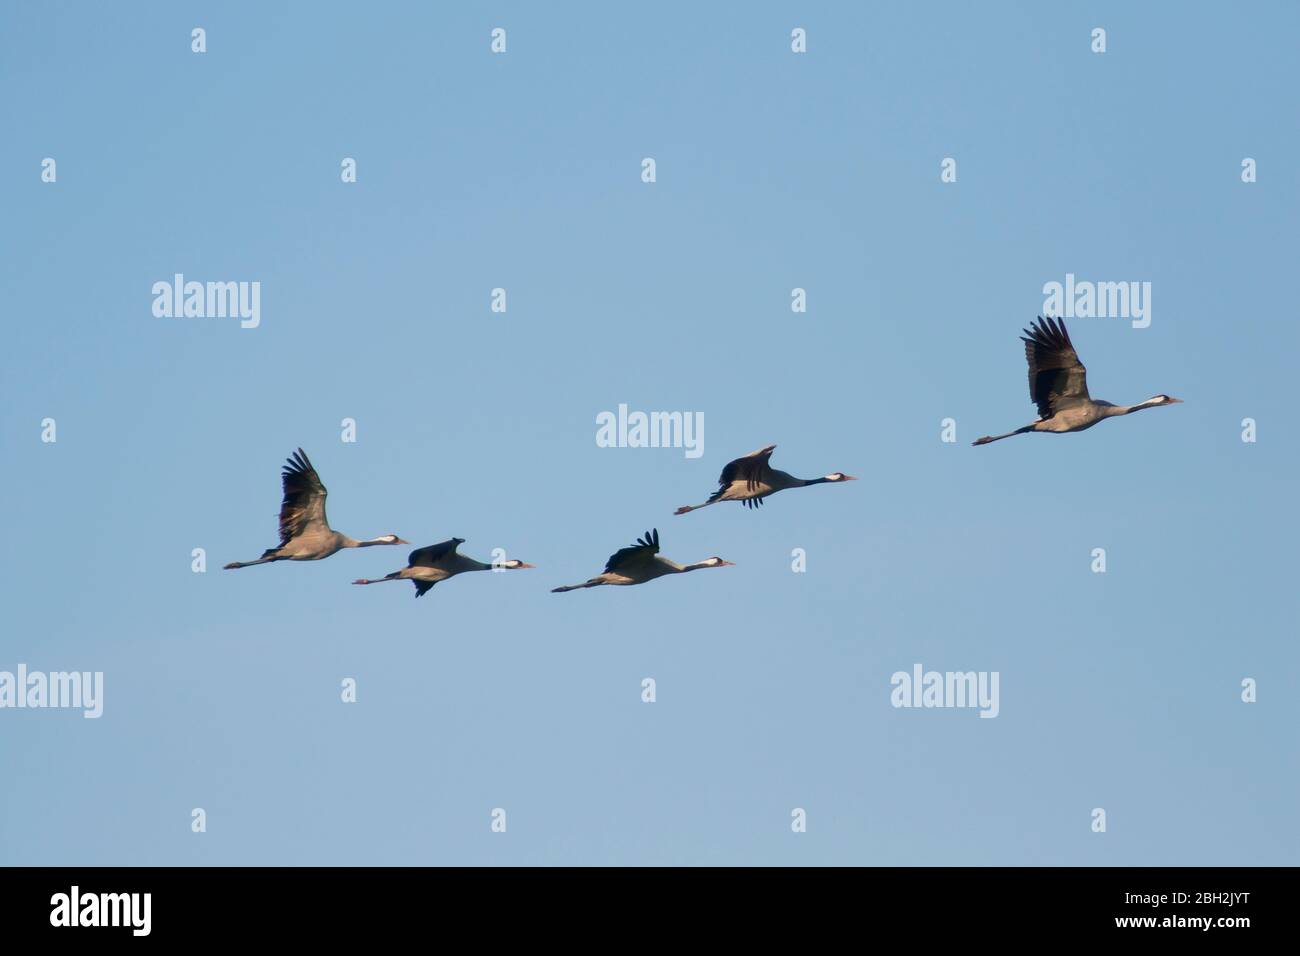 Germany, Flock of common cranes (Grus grus) flying against clear blue sky Stock Photo